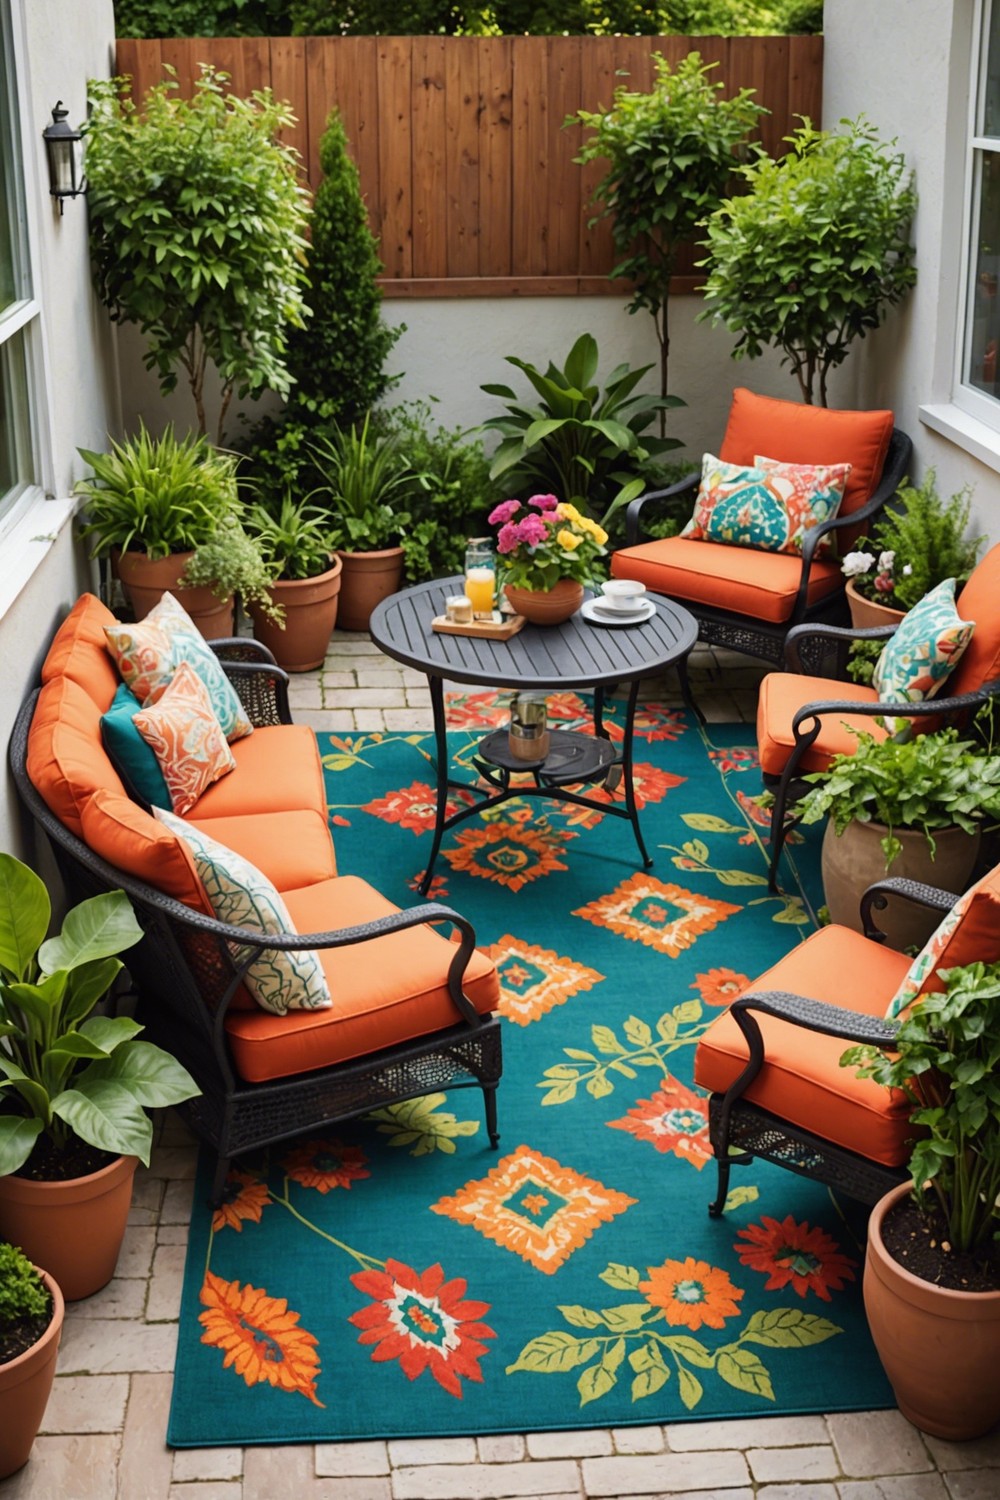 Outdoor Rugs for a Pop of Color